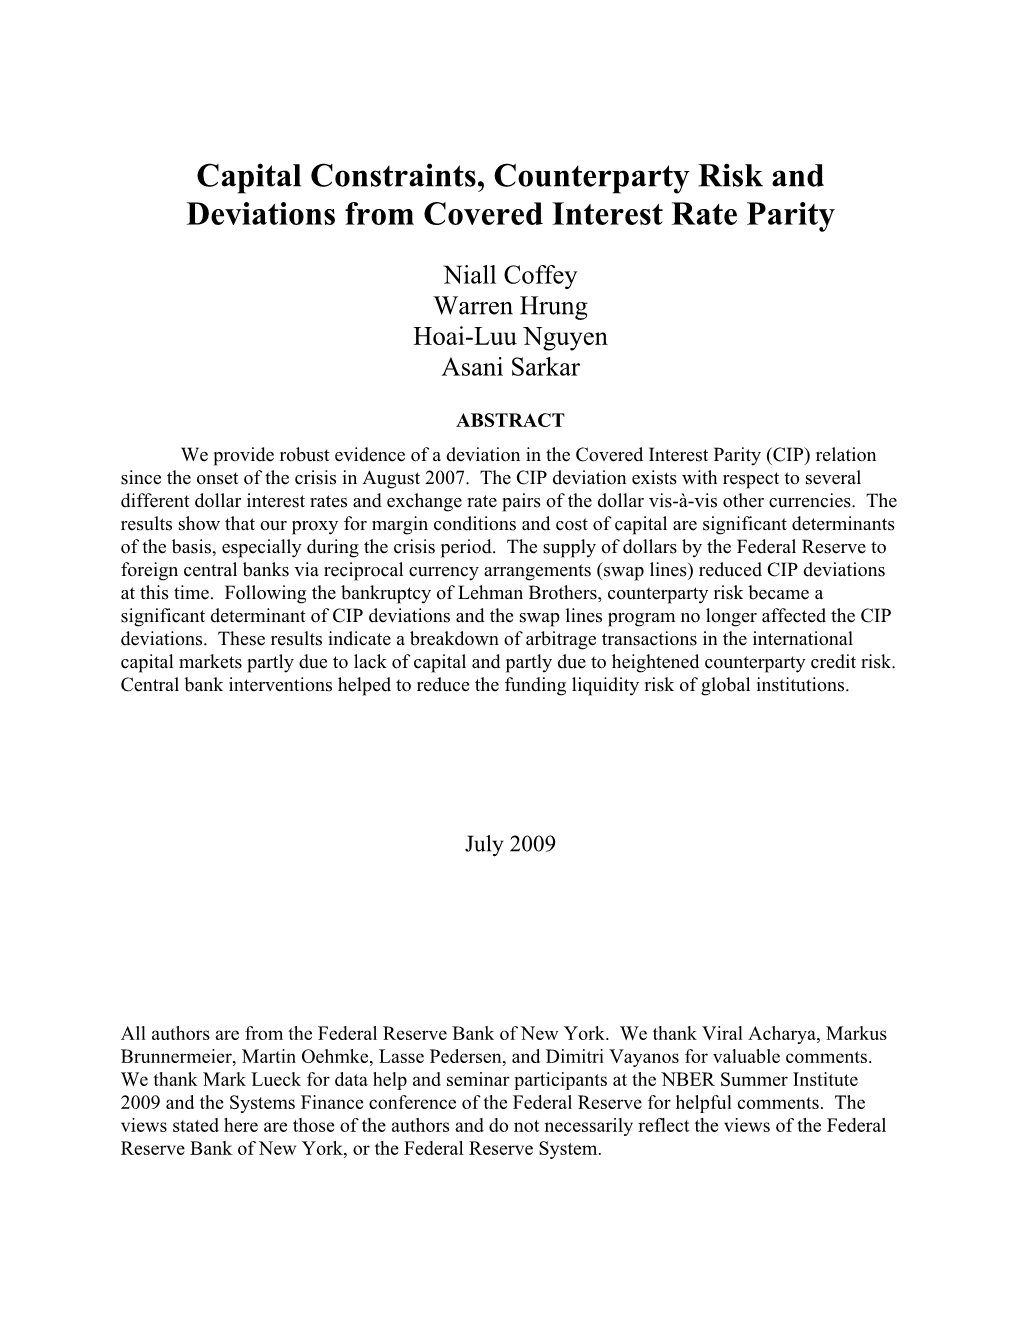 Capital Constraints, Counterparty Risk and Deviations from Covered Interest Rate Parity